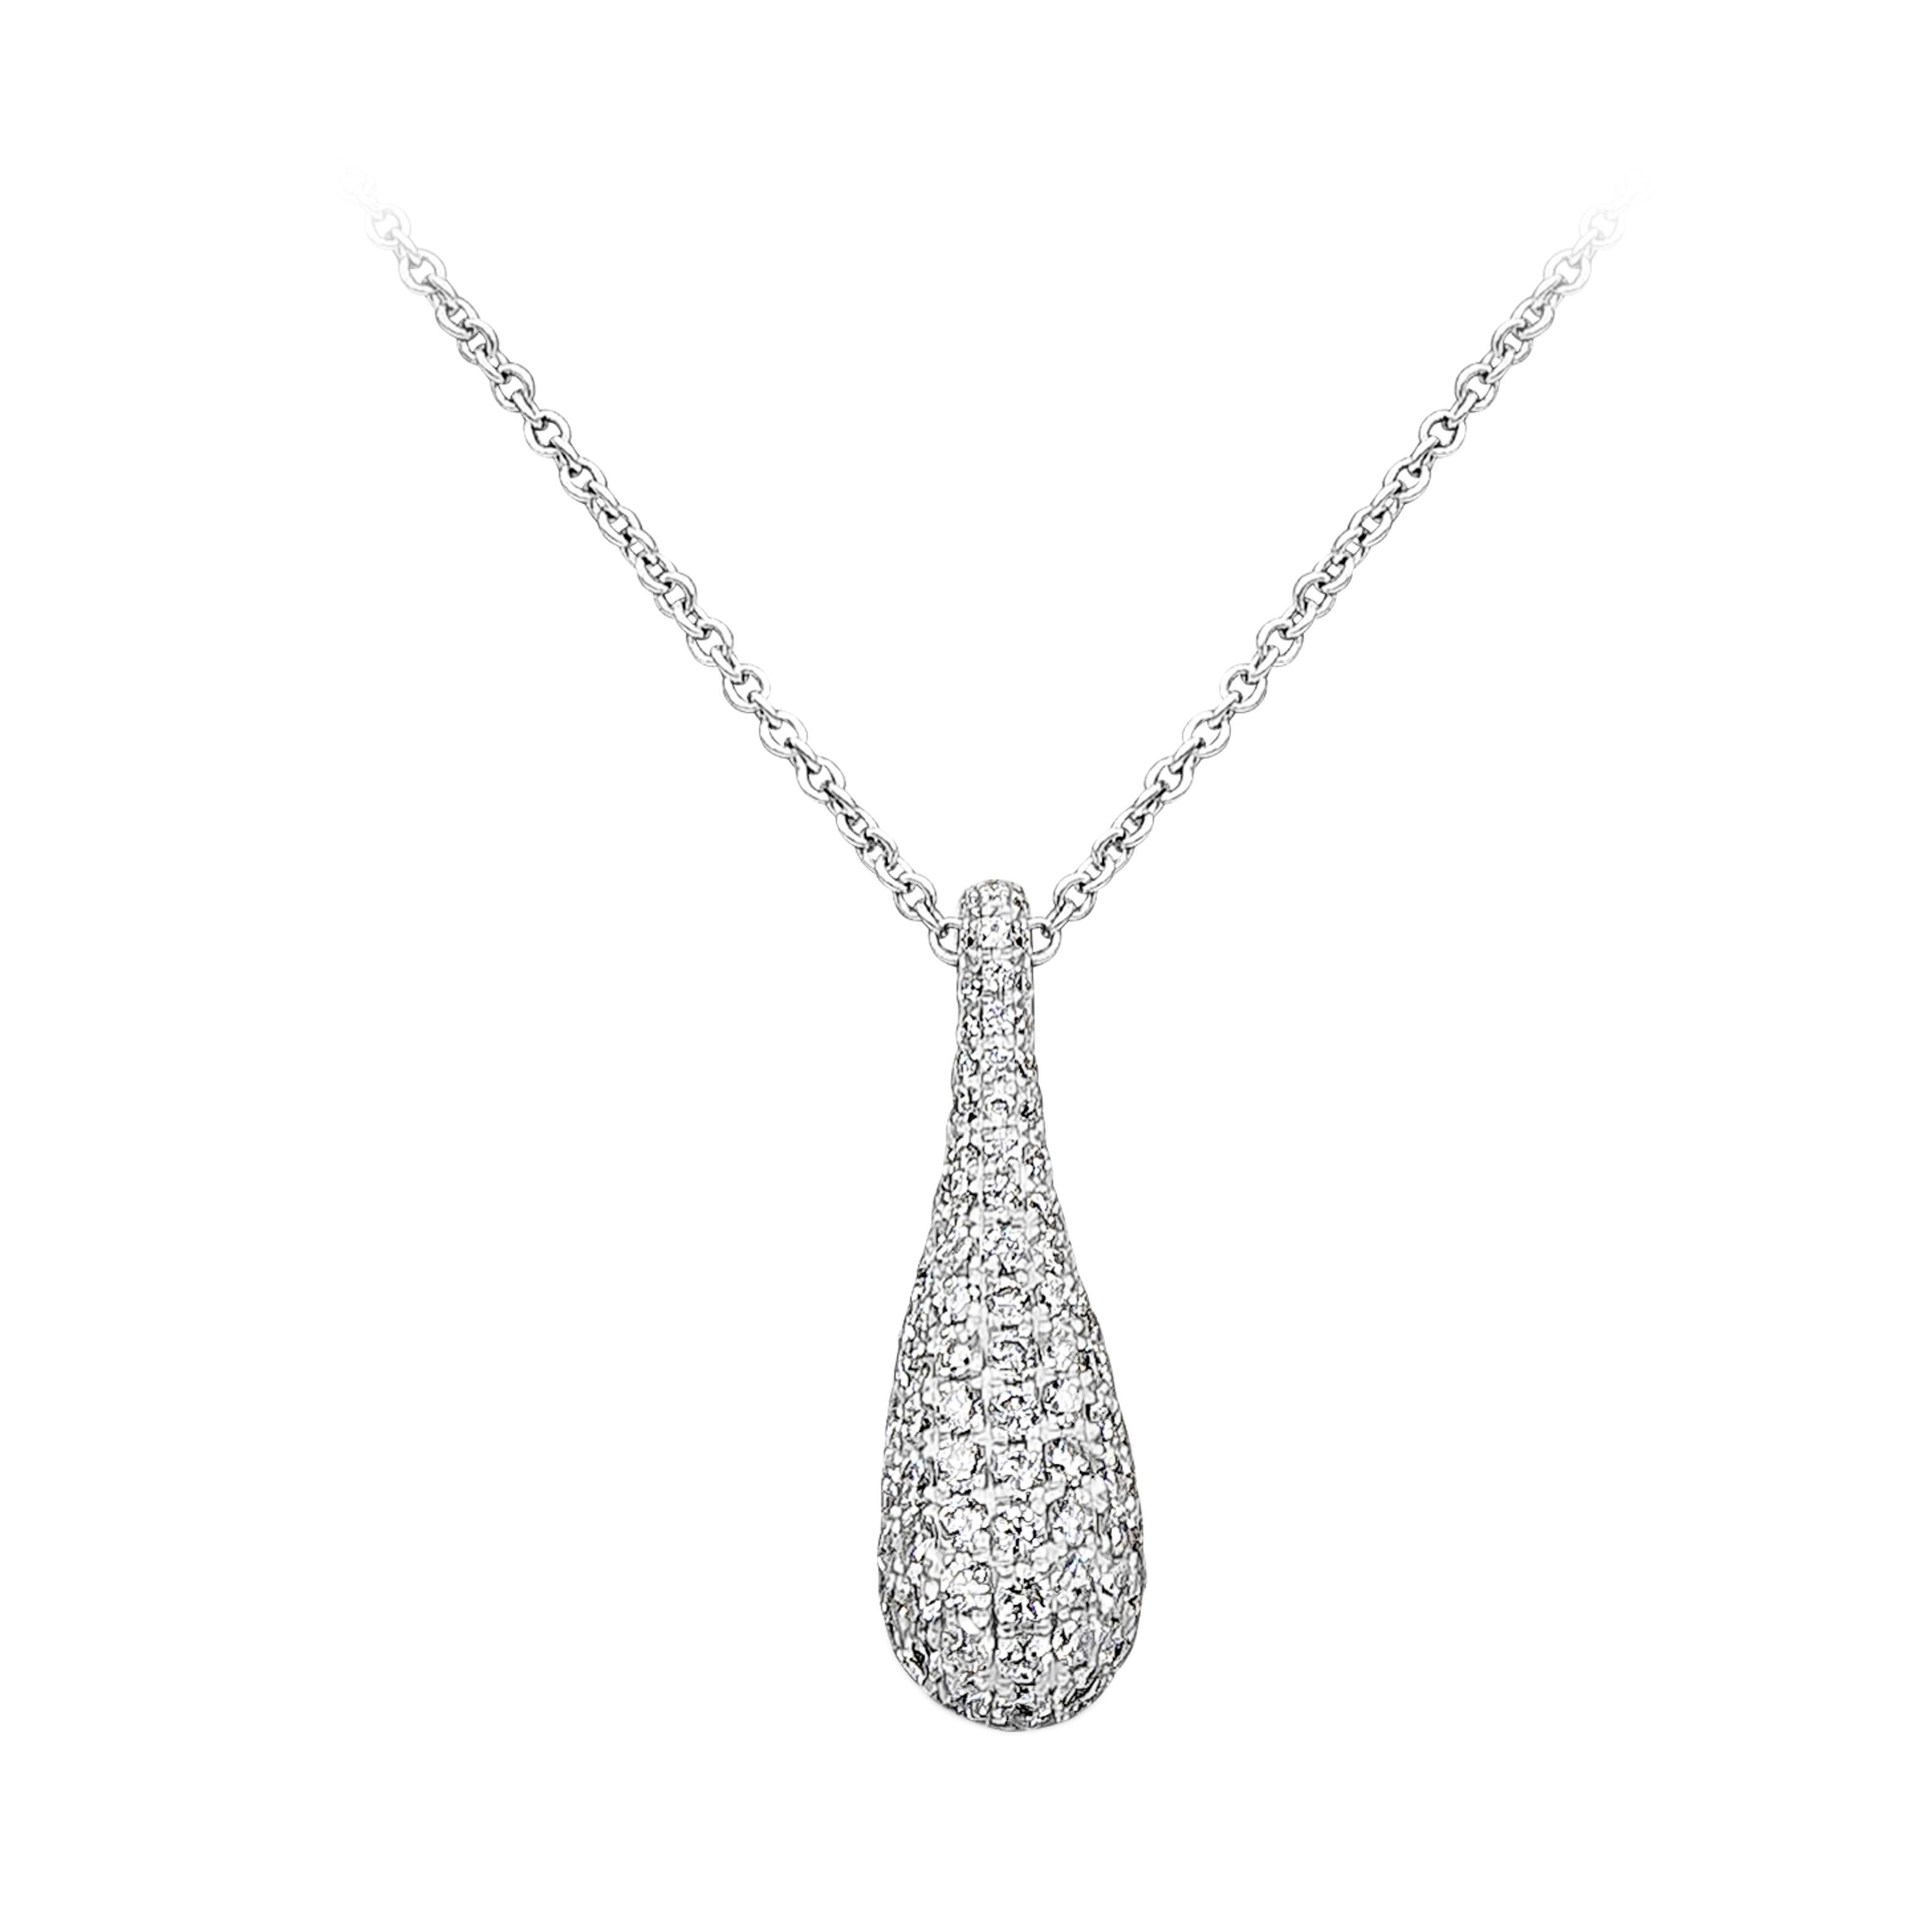 A fashionable and stunning pendant necklace showcasing 110 brilliant round cut diamonds weighing 0.94 carats total, set in a beautiful dome micro-pave set and classic four prong setting. Suspended on an 18 inches adjustable chain and finely made in